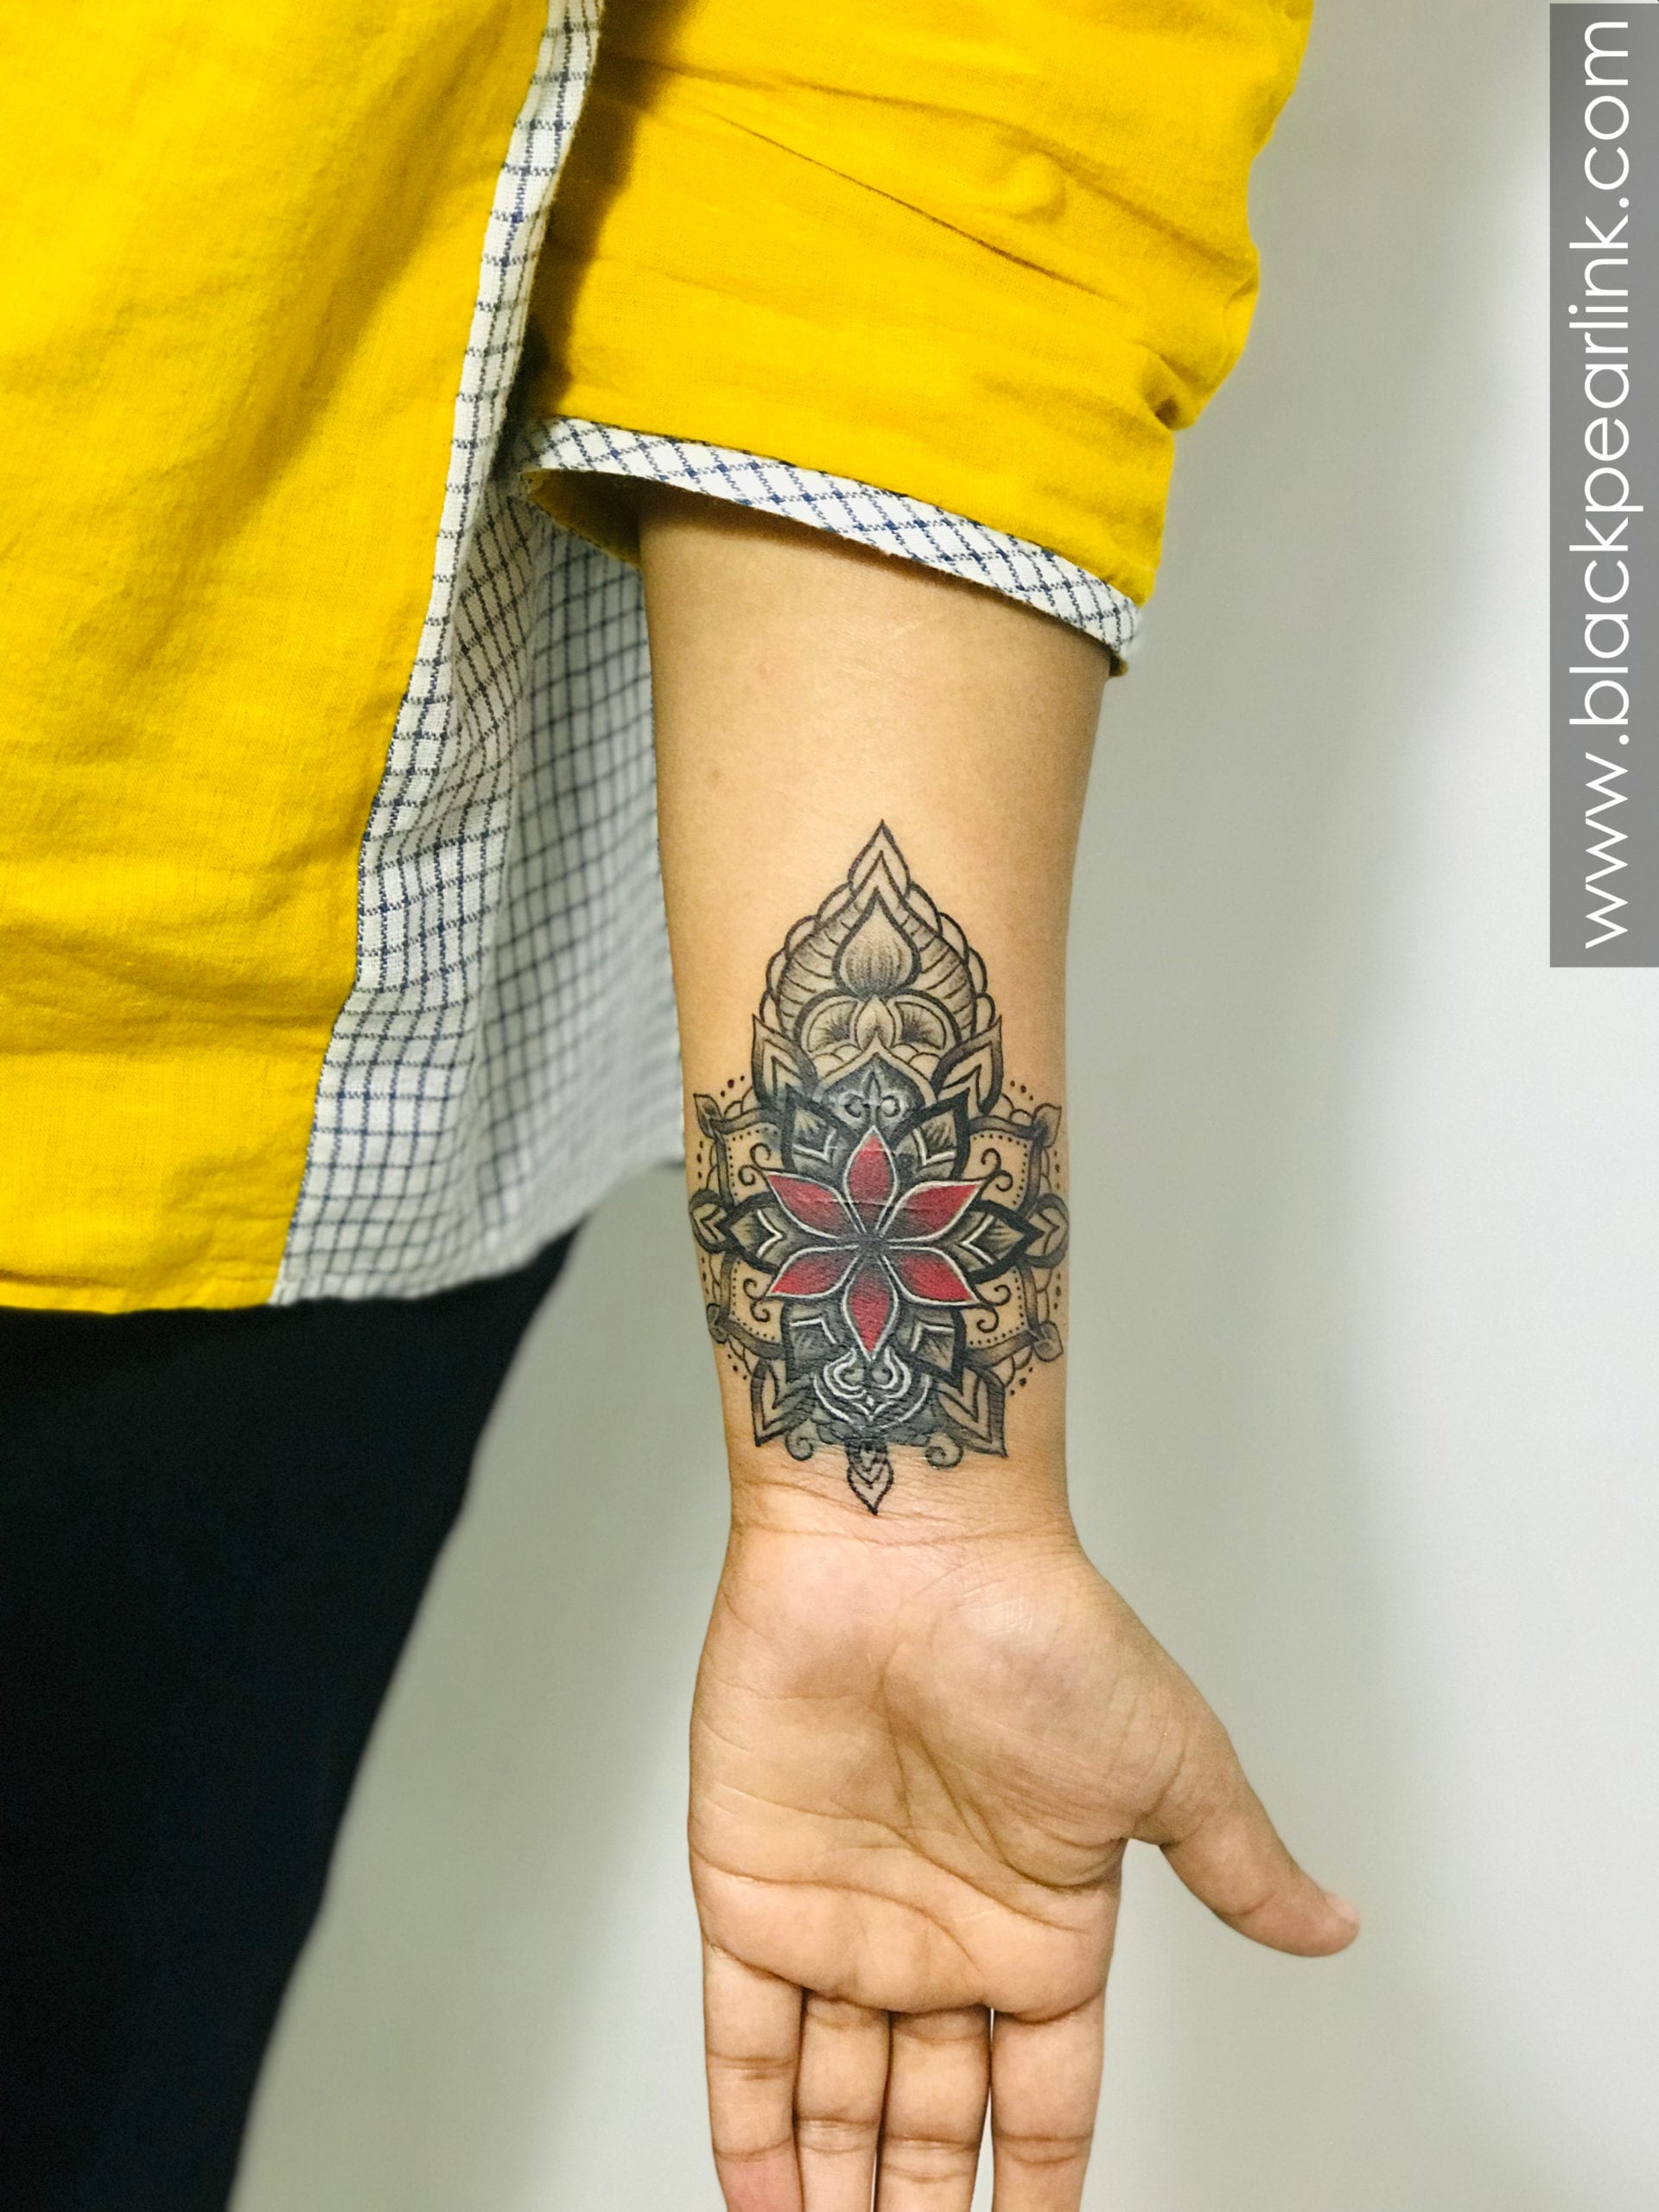 Tattoos for girls: charming and stylish tattoos done at Black Pearl Studio